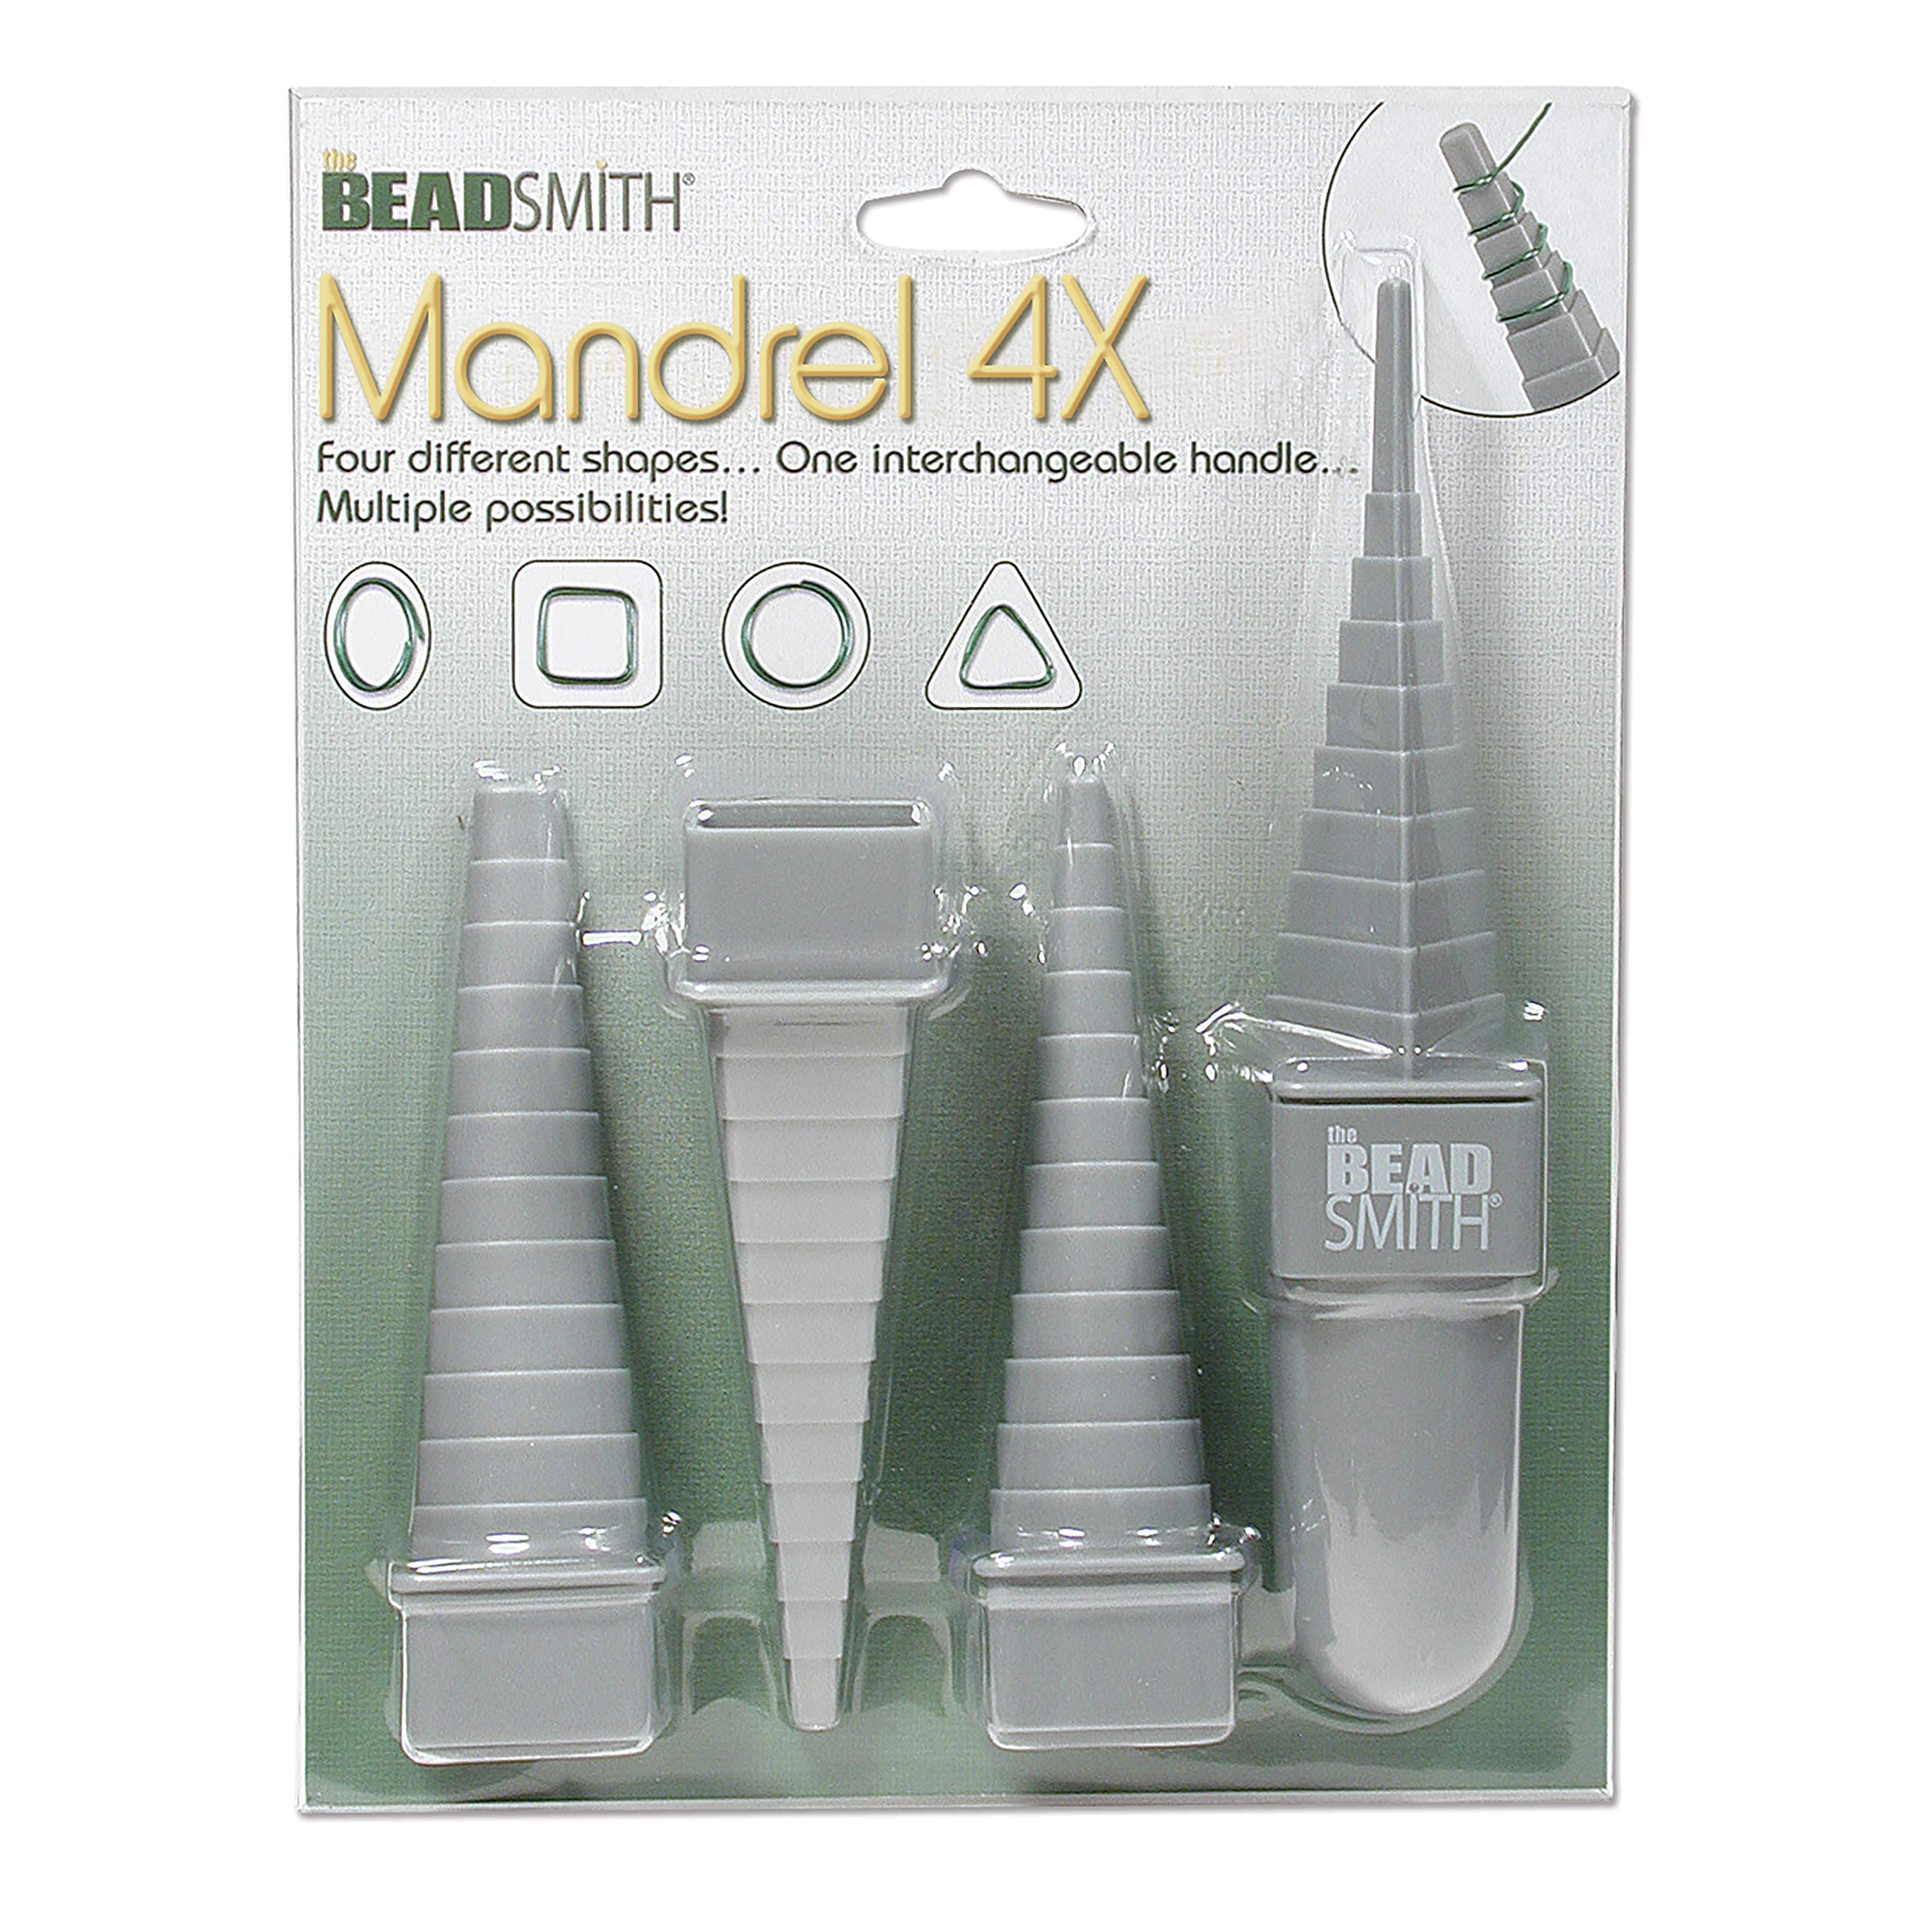 The Beadsmith Mandrel 4X, Wire Wrapping Set, 4 Different Shapes, Oval, Square, Round and Triangle, Plus Interchangeable Handle, Metal Jewelry Forming and Shaping Tool